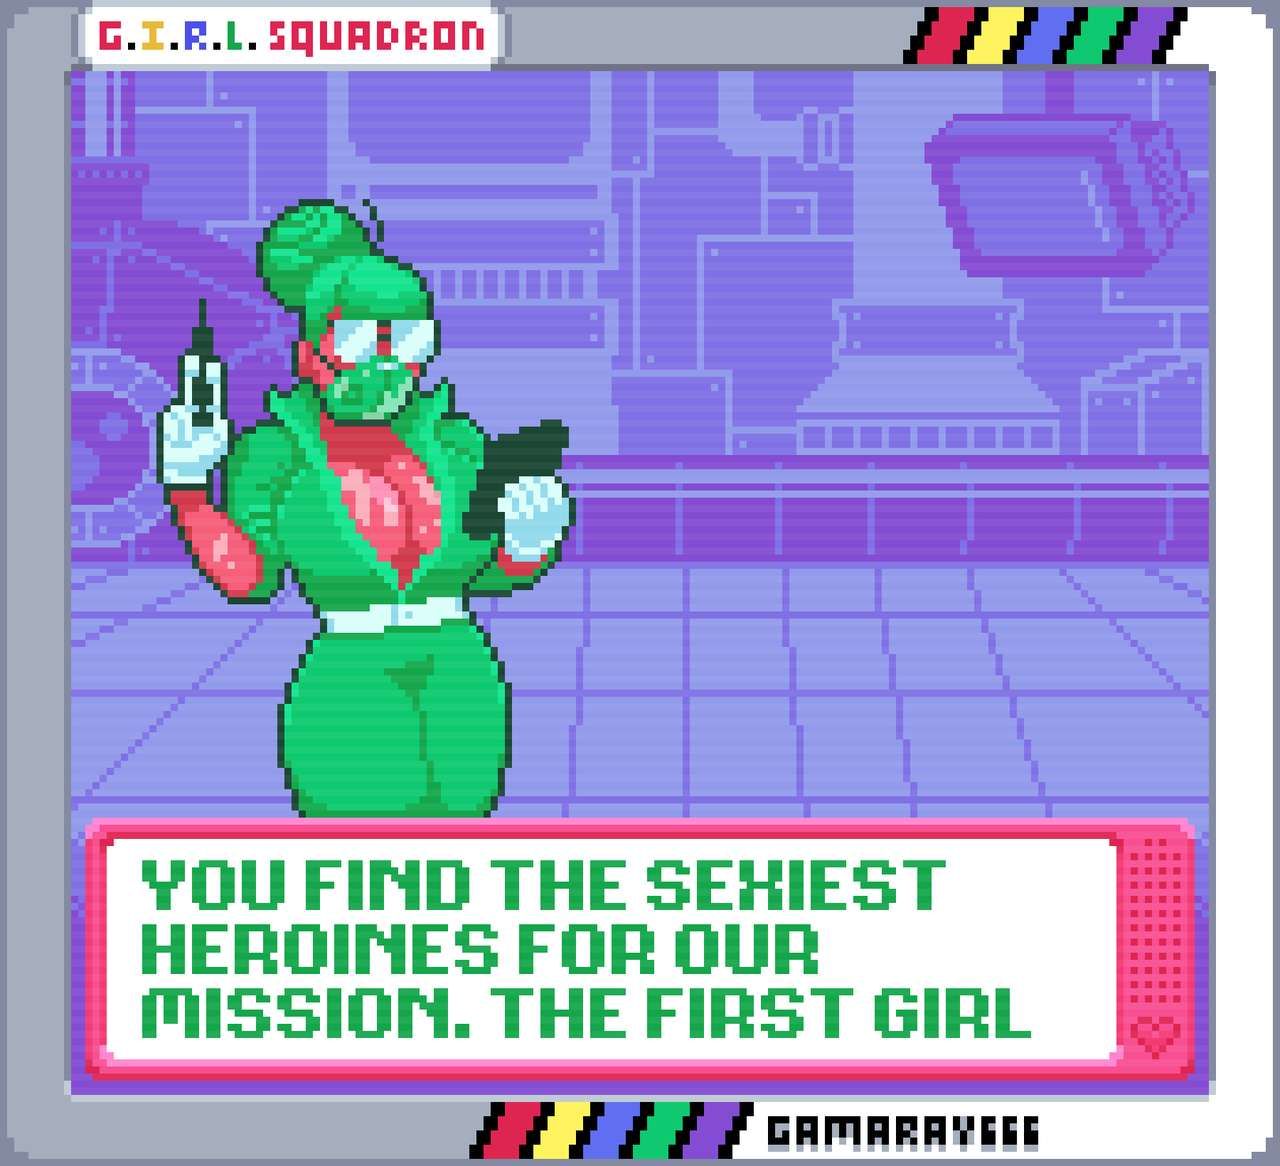 G. I. R. L. SQUADRON - A Choose Your Own Adventure 10